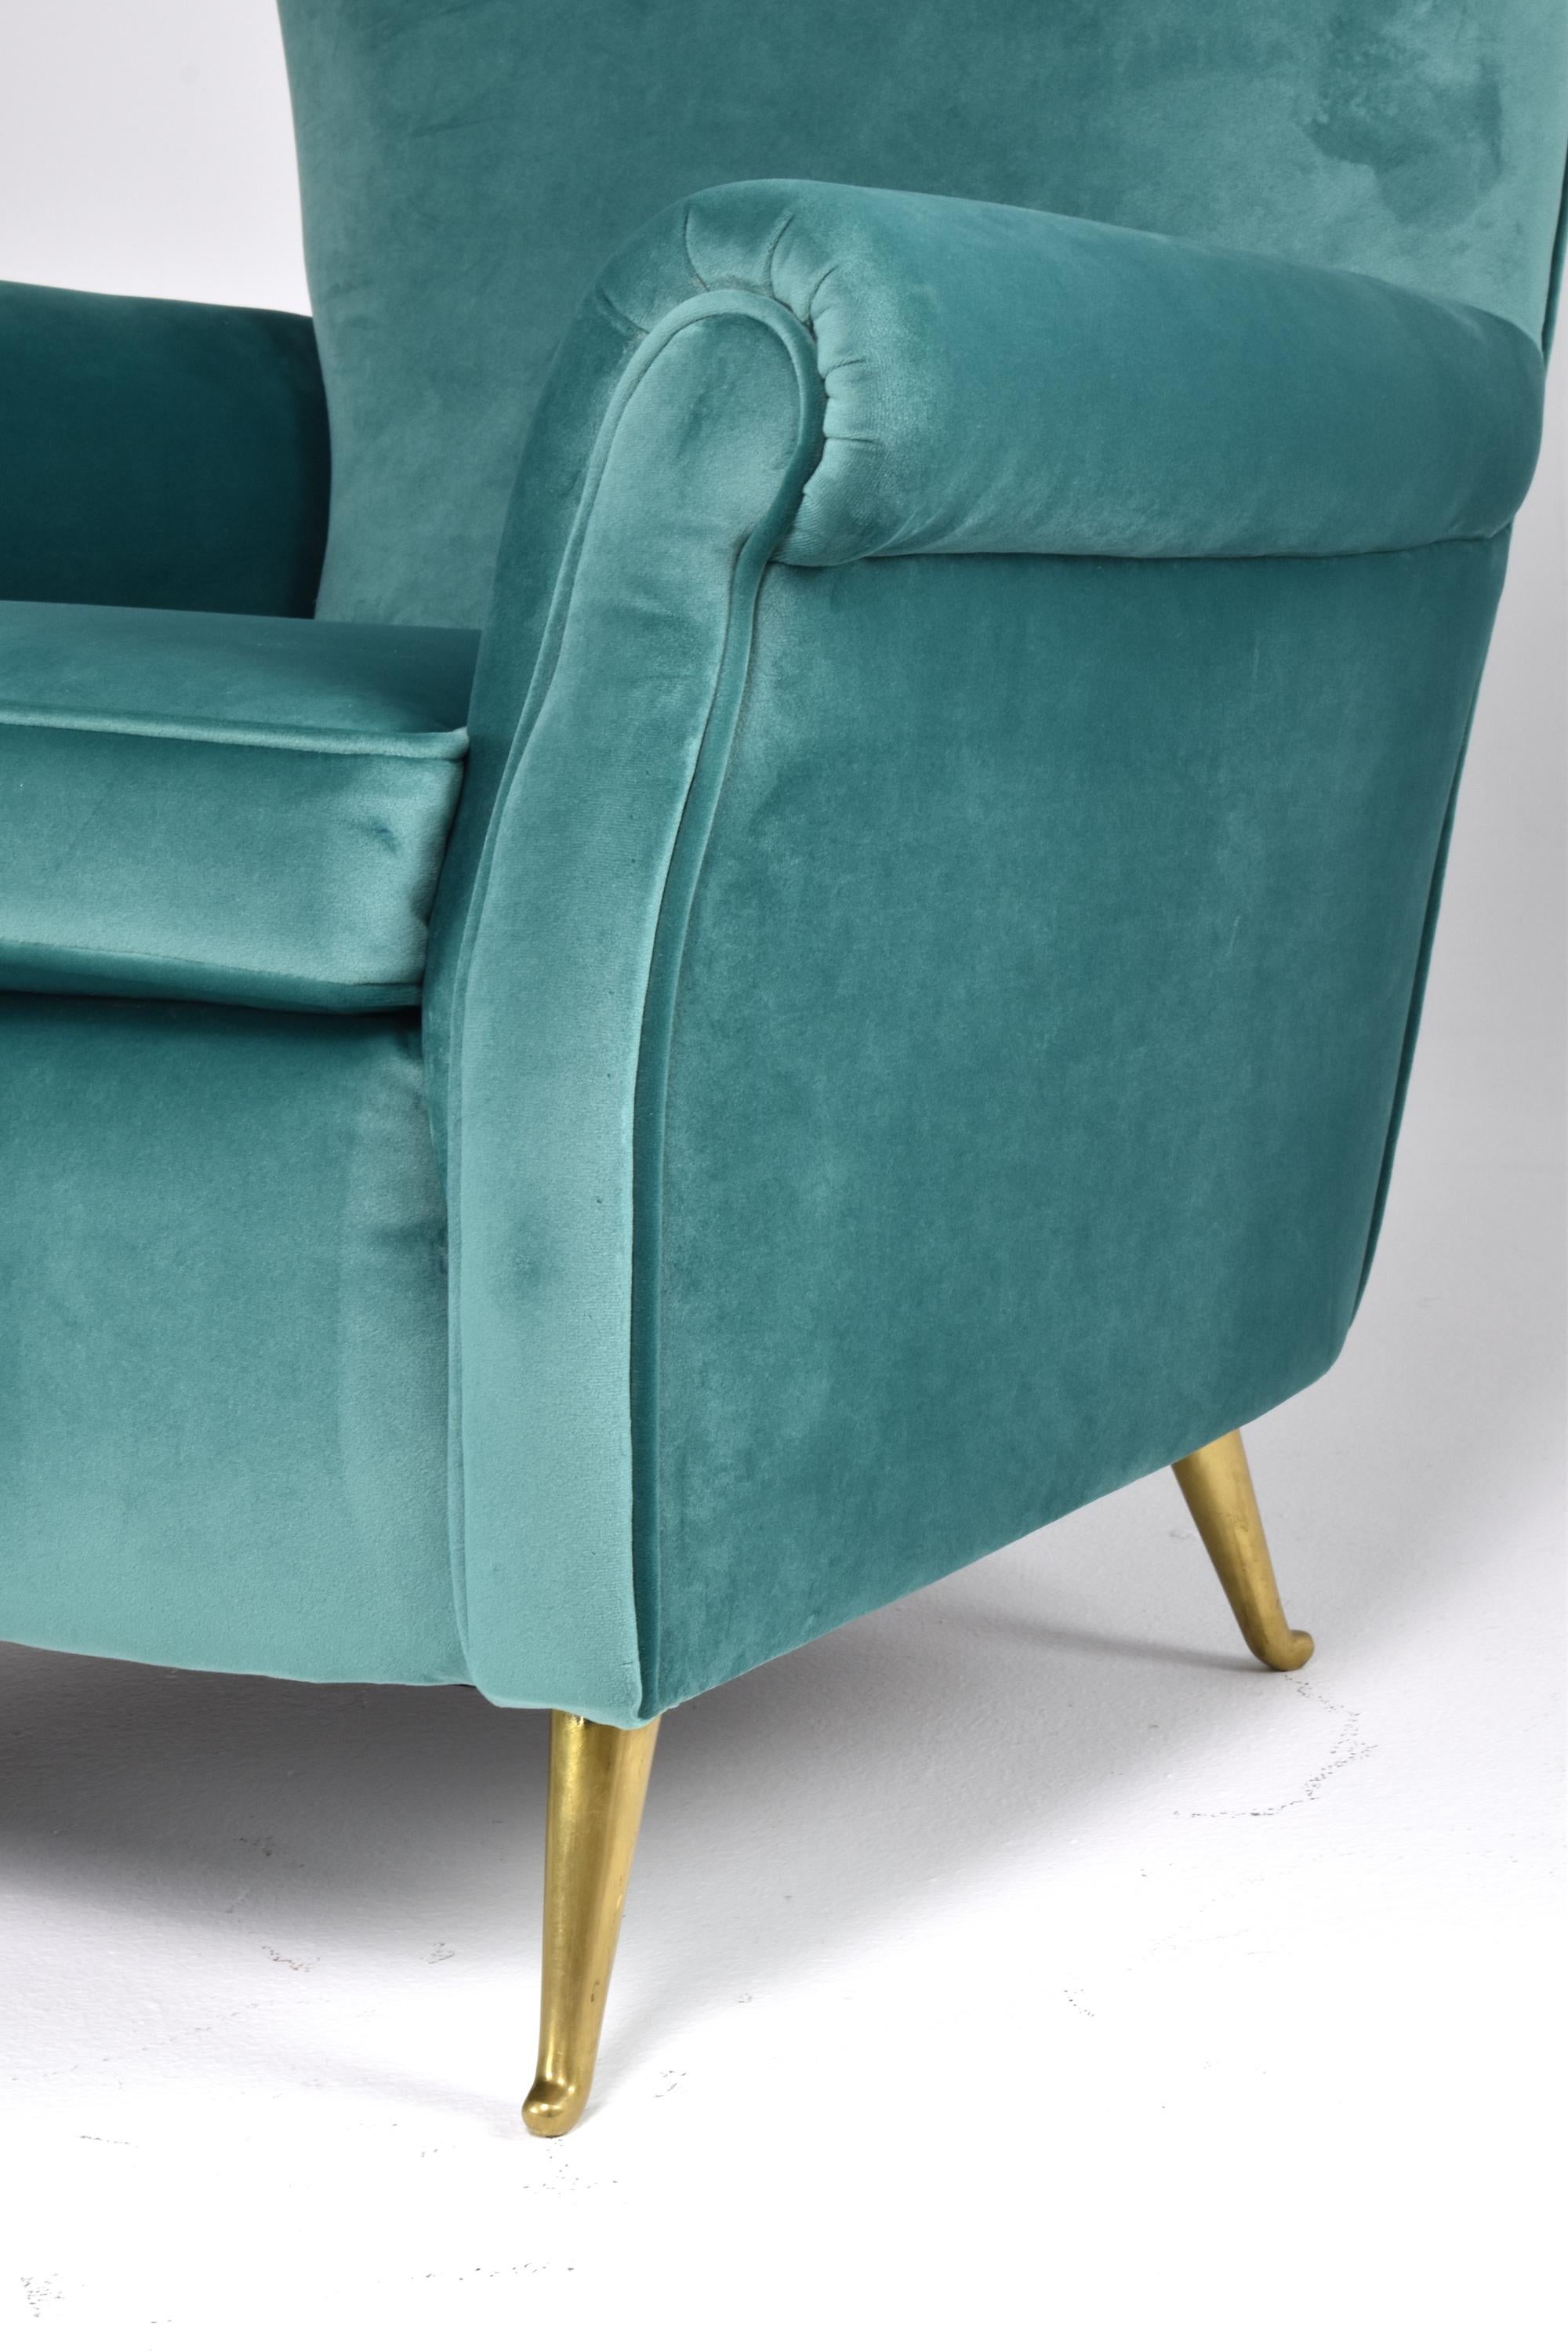 Brass Italian Midcentury Armchairs by ISA Bergamo, Set of Two, 1950s For Sale